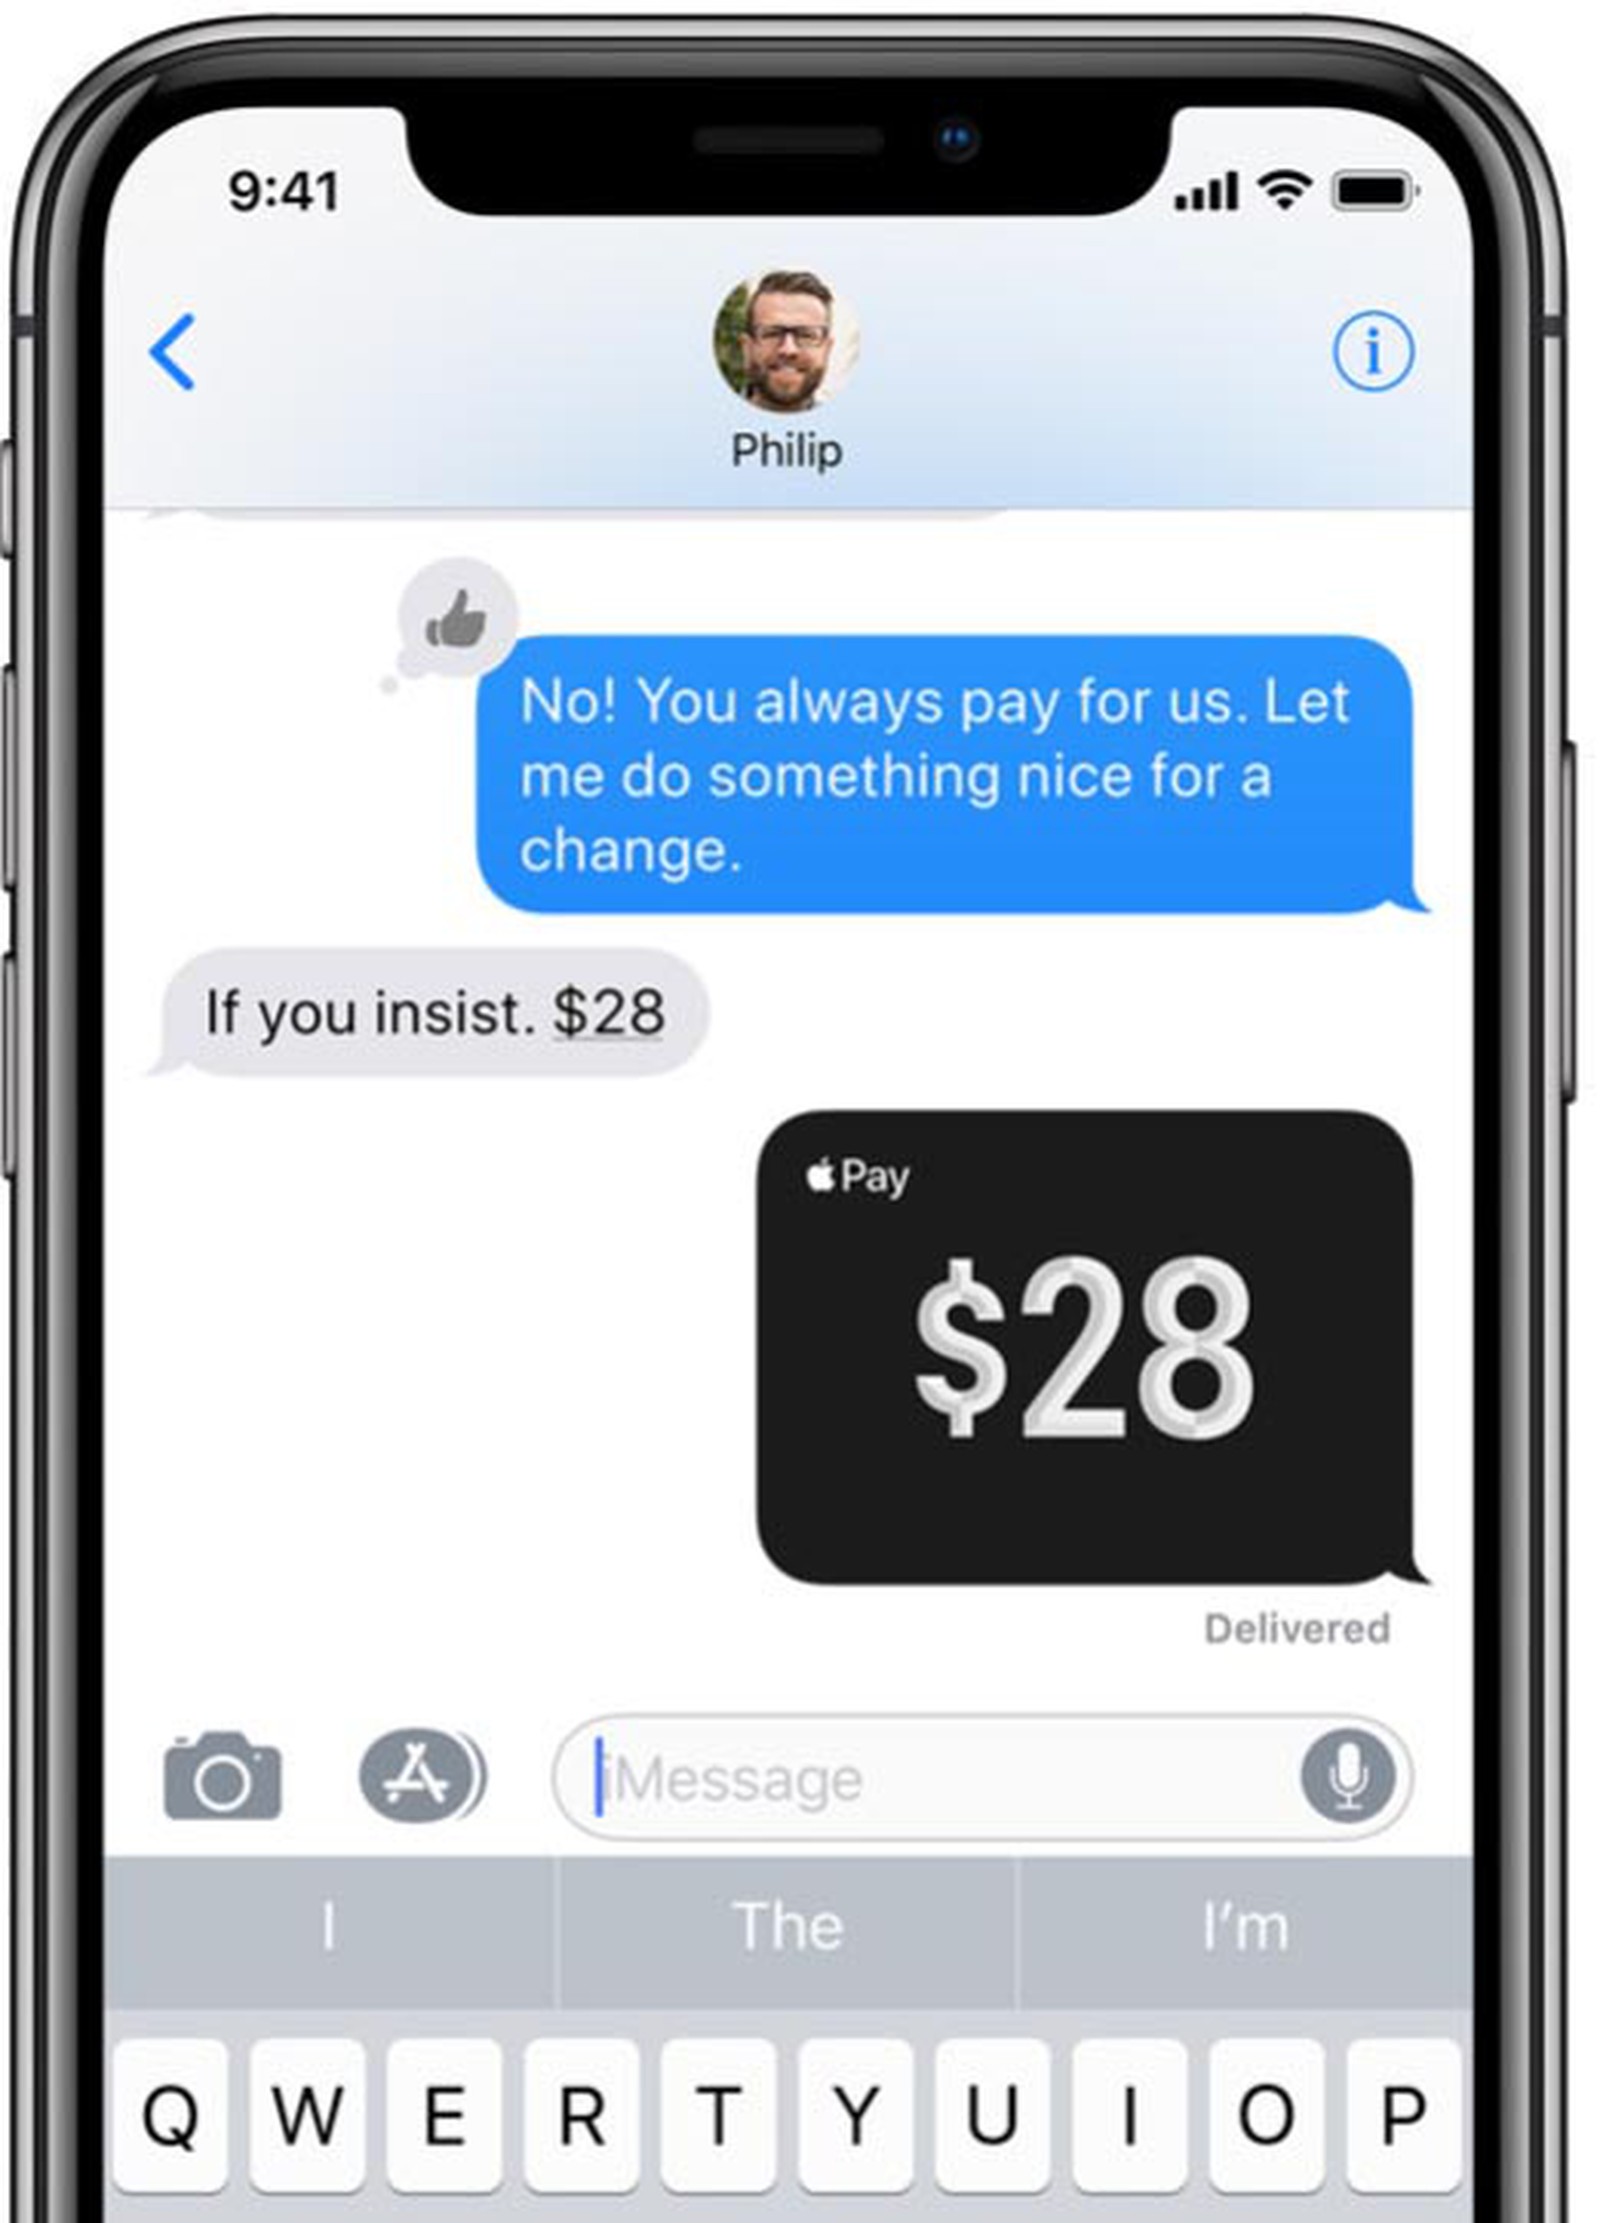 apple-pay-cash-officially-launches-today-after-early-roll-out-to-many